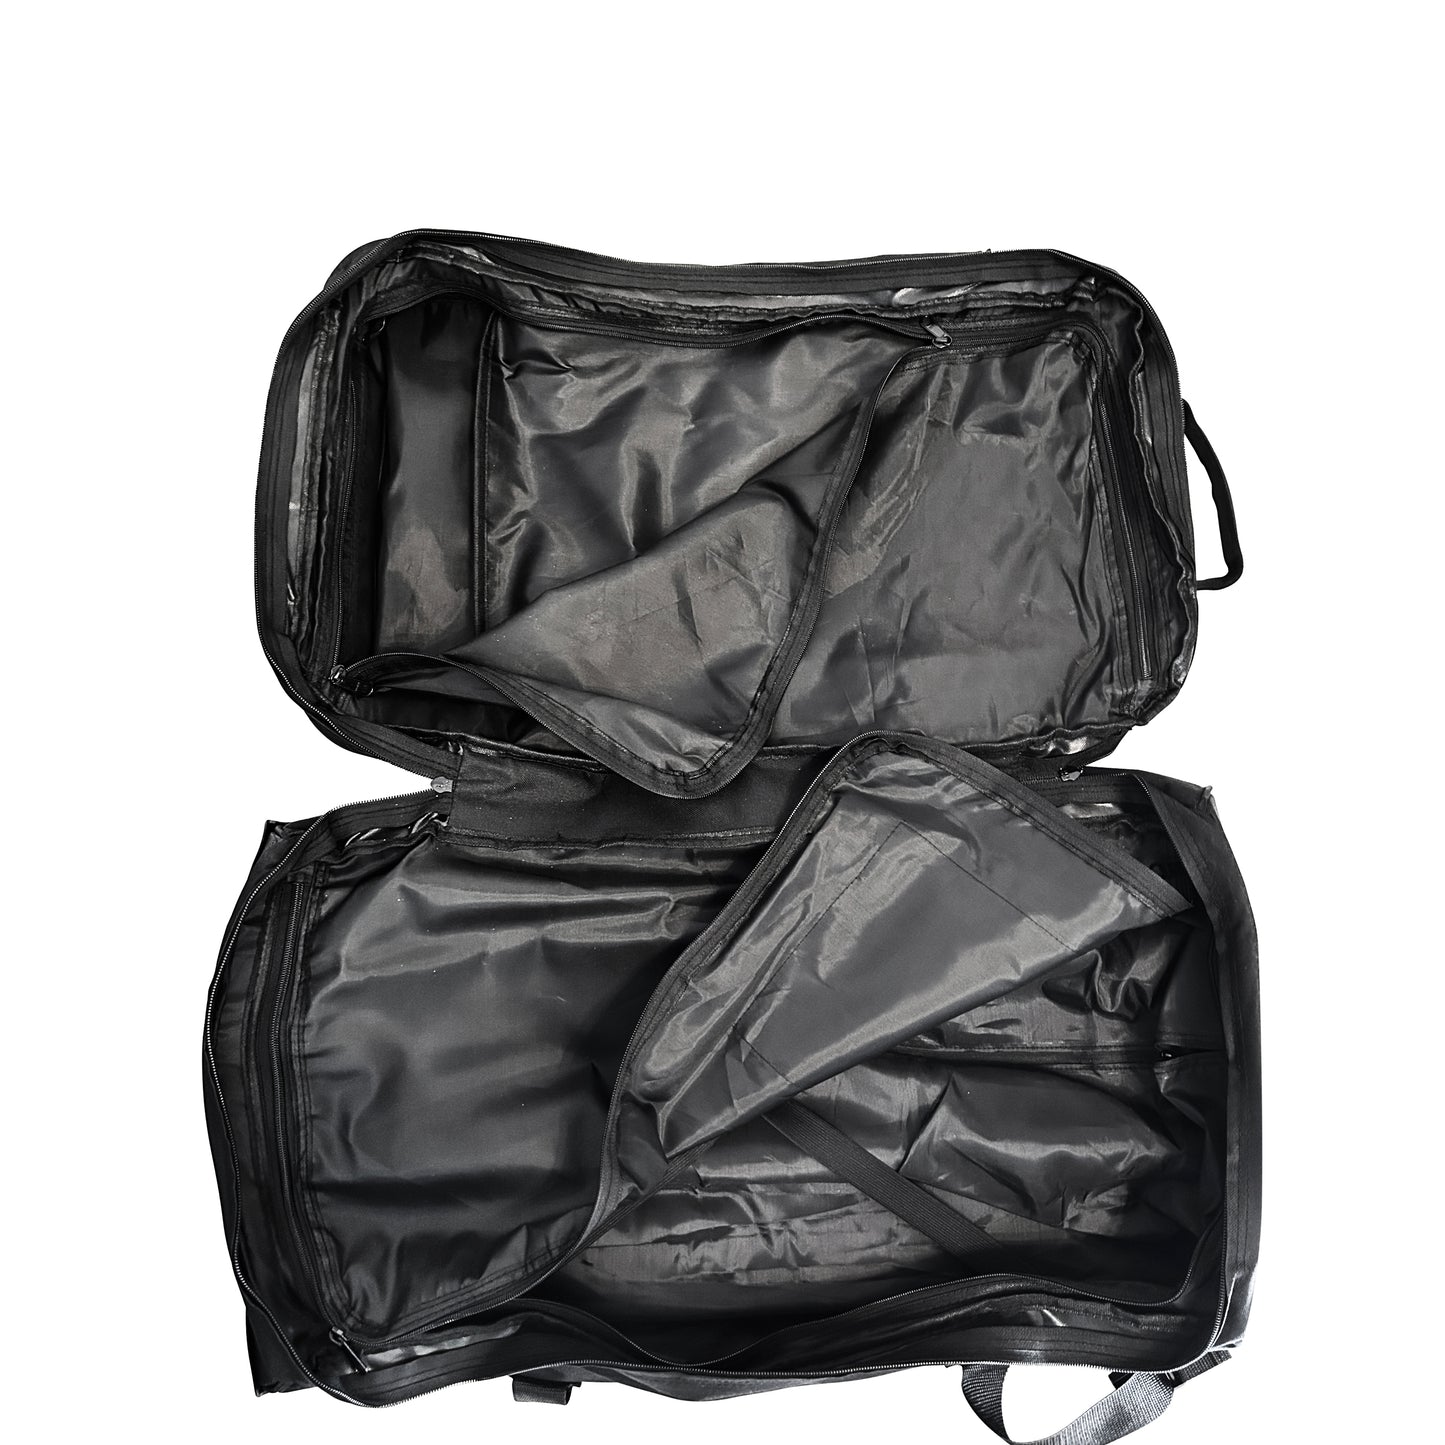 Holdall Wheeled Bags